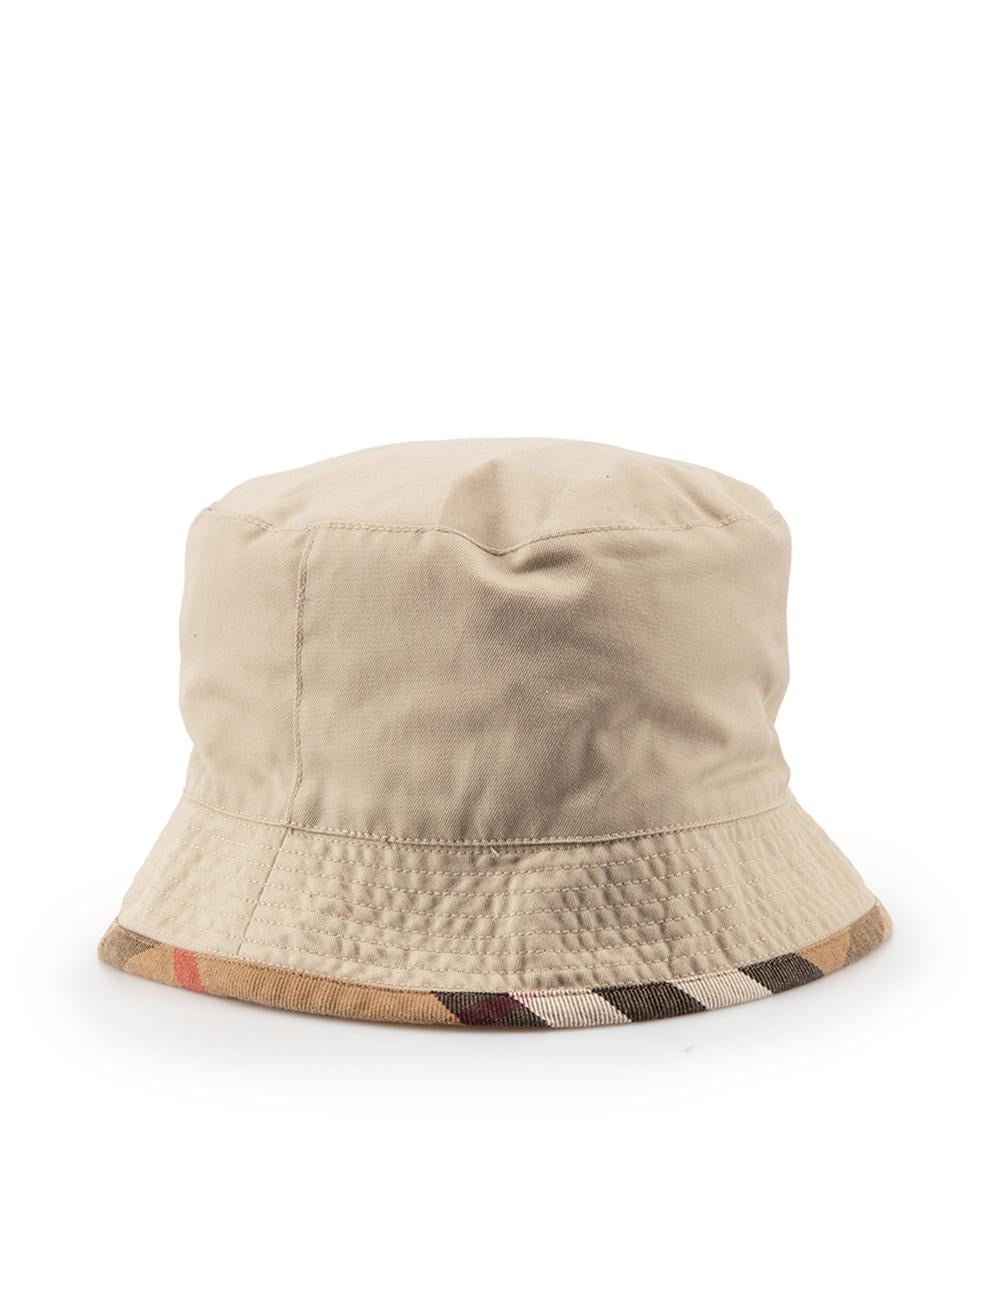 CONDITION is Never Worn. No visible wear to hat is evident on this used Burberry designer resale item.



Details


Beige

Cotton

Bucket hat

Nova check trimmings





Made in China 



Composition

51% Cotton and 49% Polyester



Care